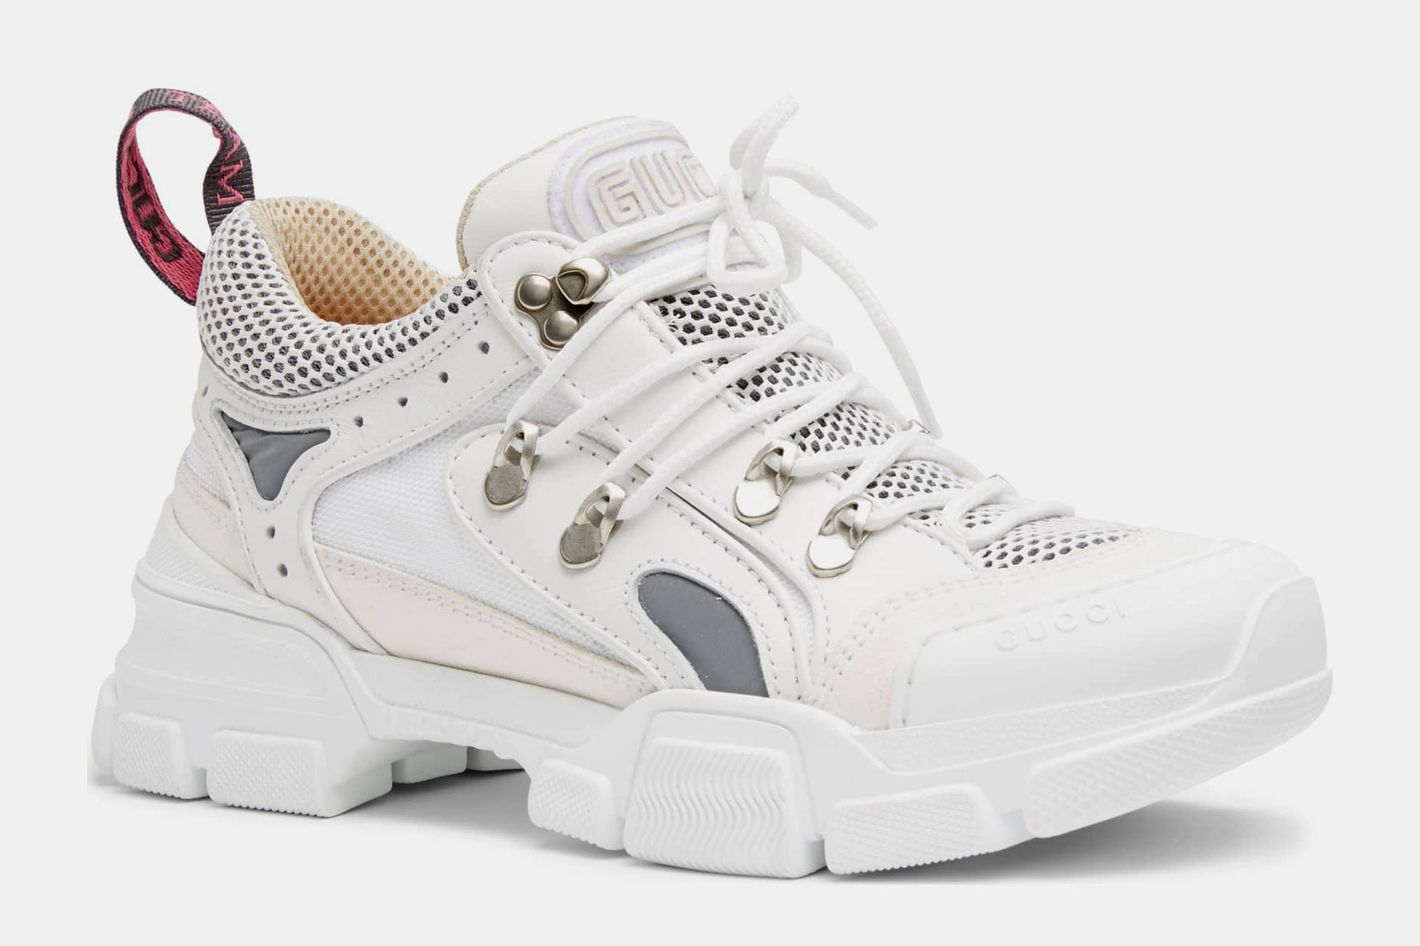 Ugly Sneakers That Are So Expensive That It Doesn't Make Sense